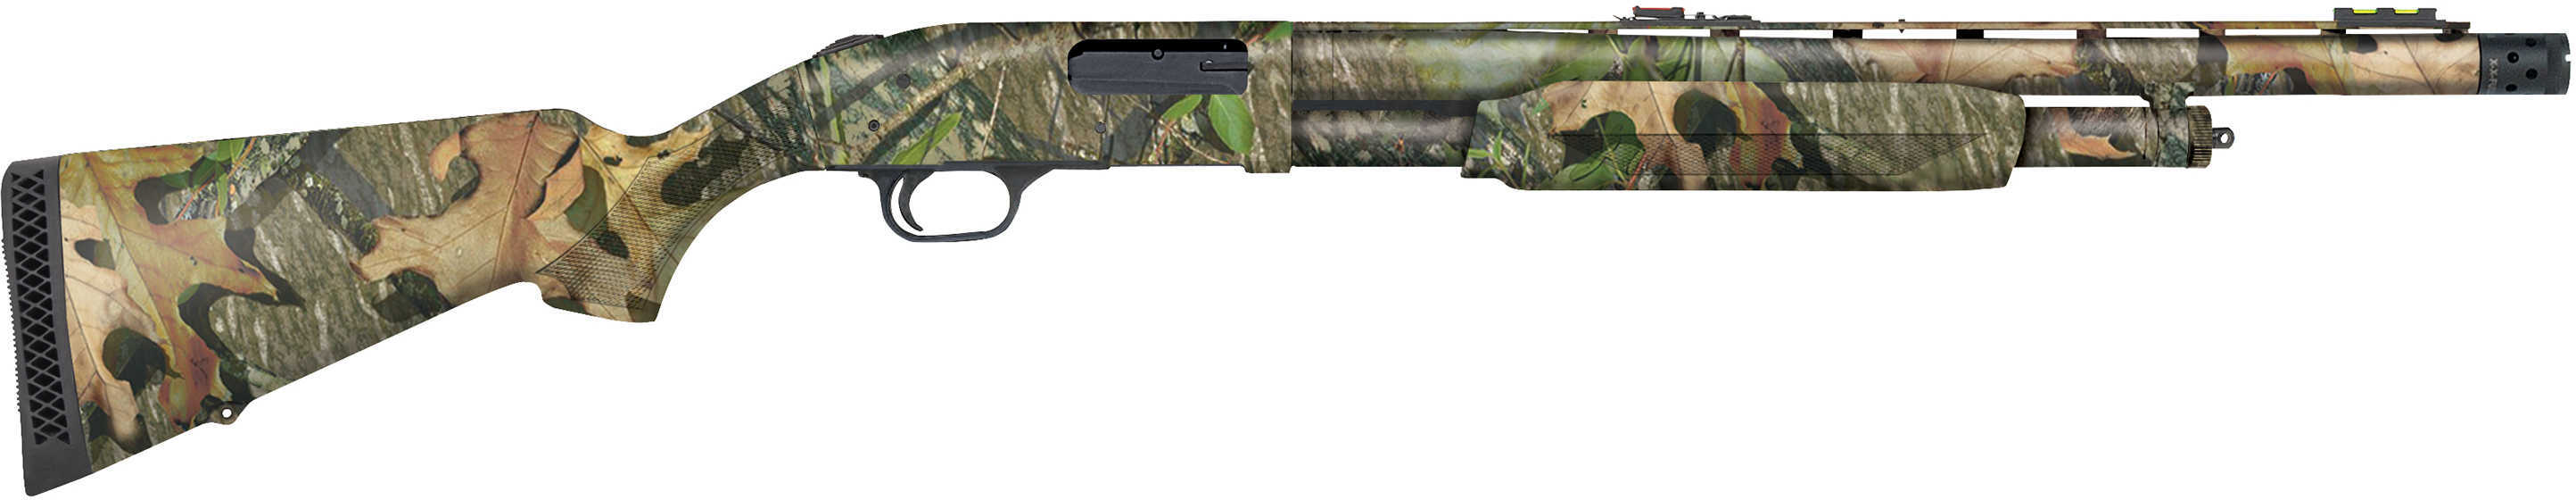 Mossberg 500 Pump 12 Gauge 20" Barrel 3" Chamber Mossy Oak Obsession Synthetic Stock Finish 52280